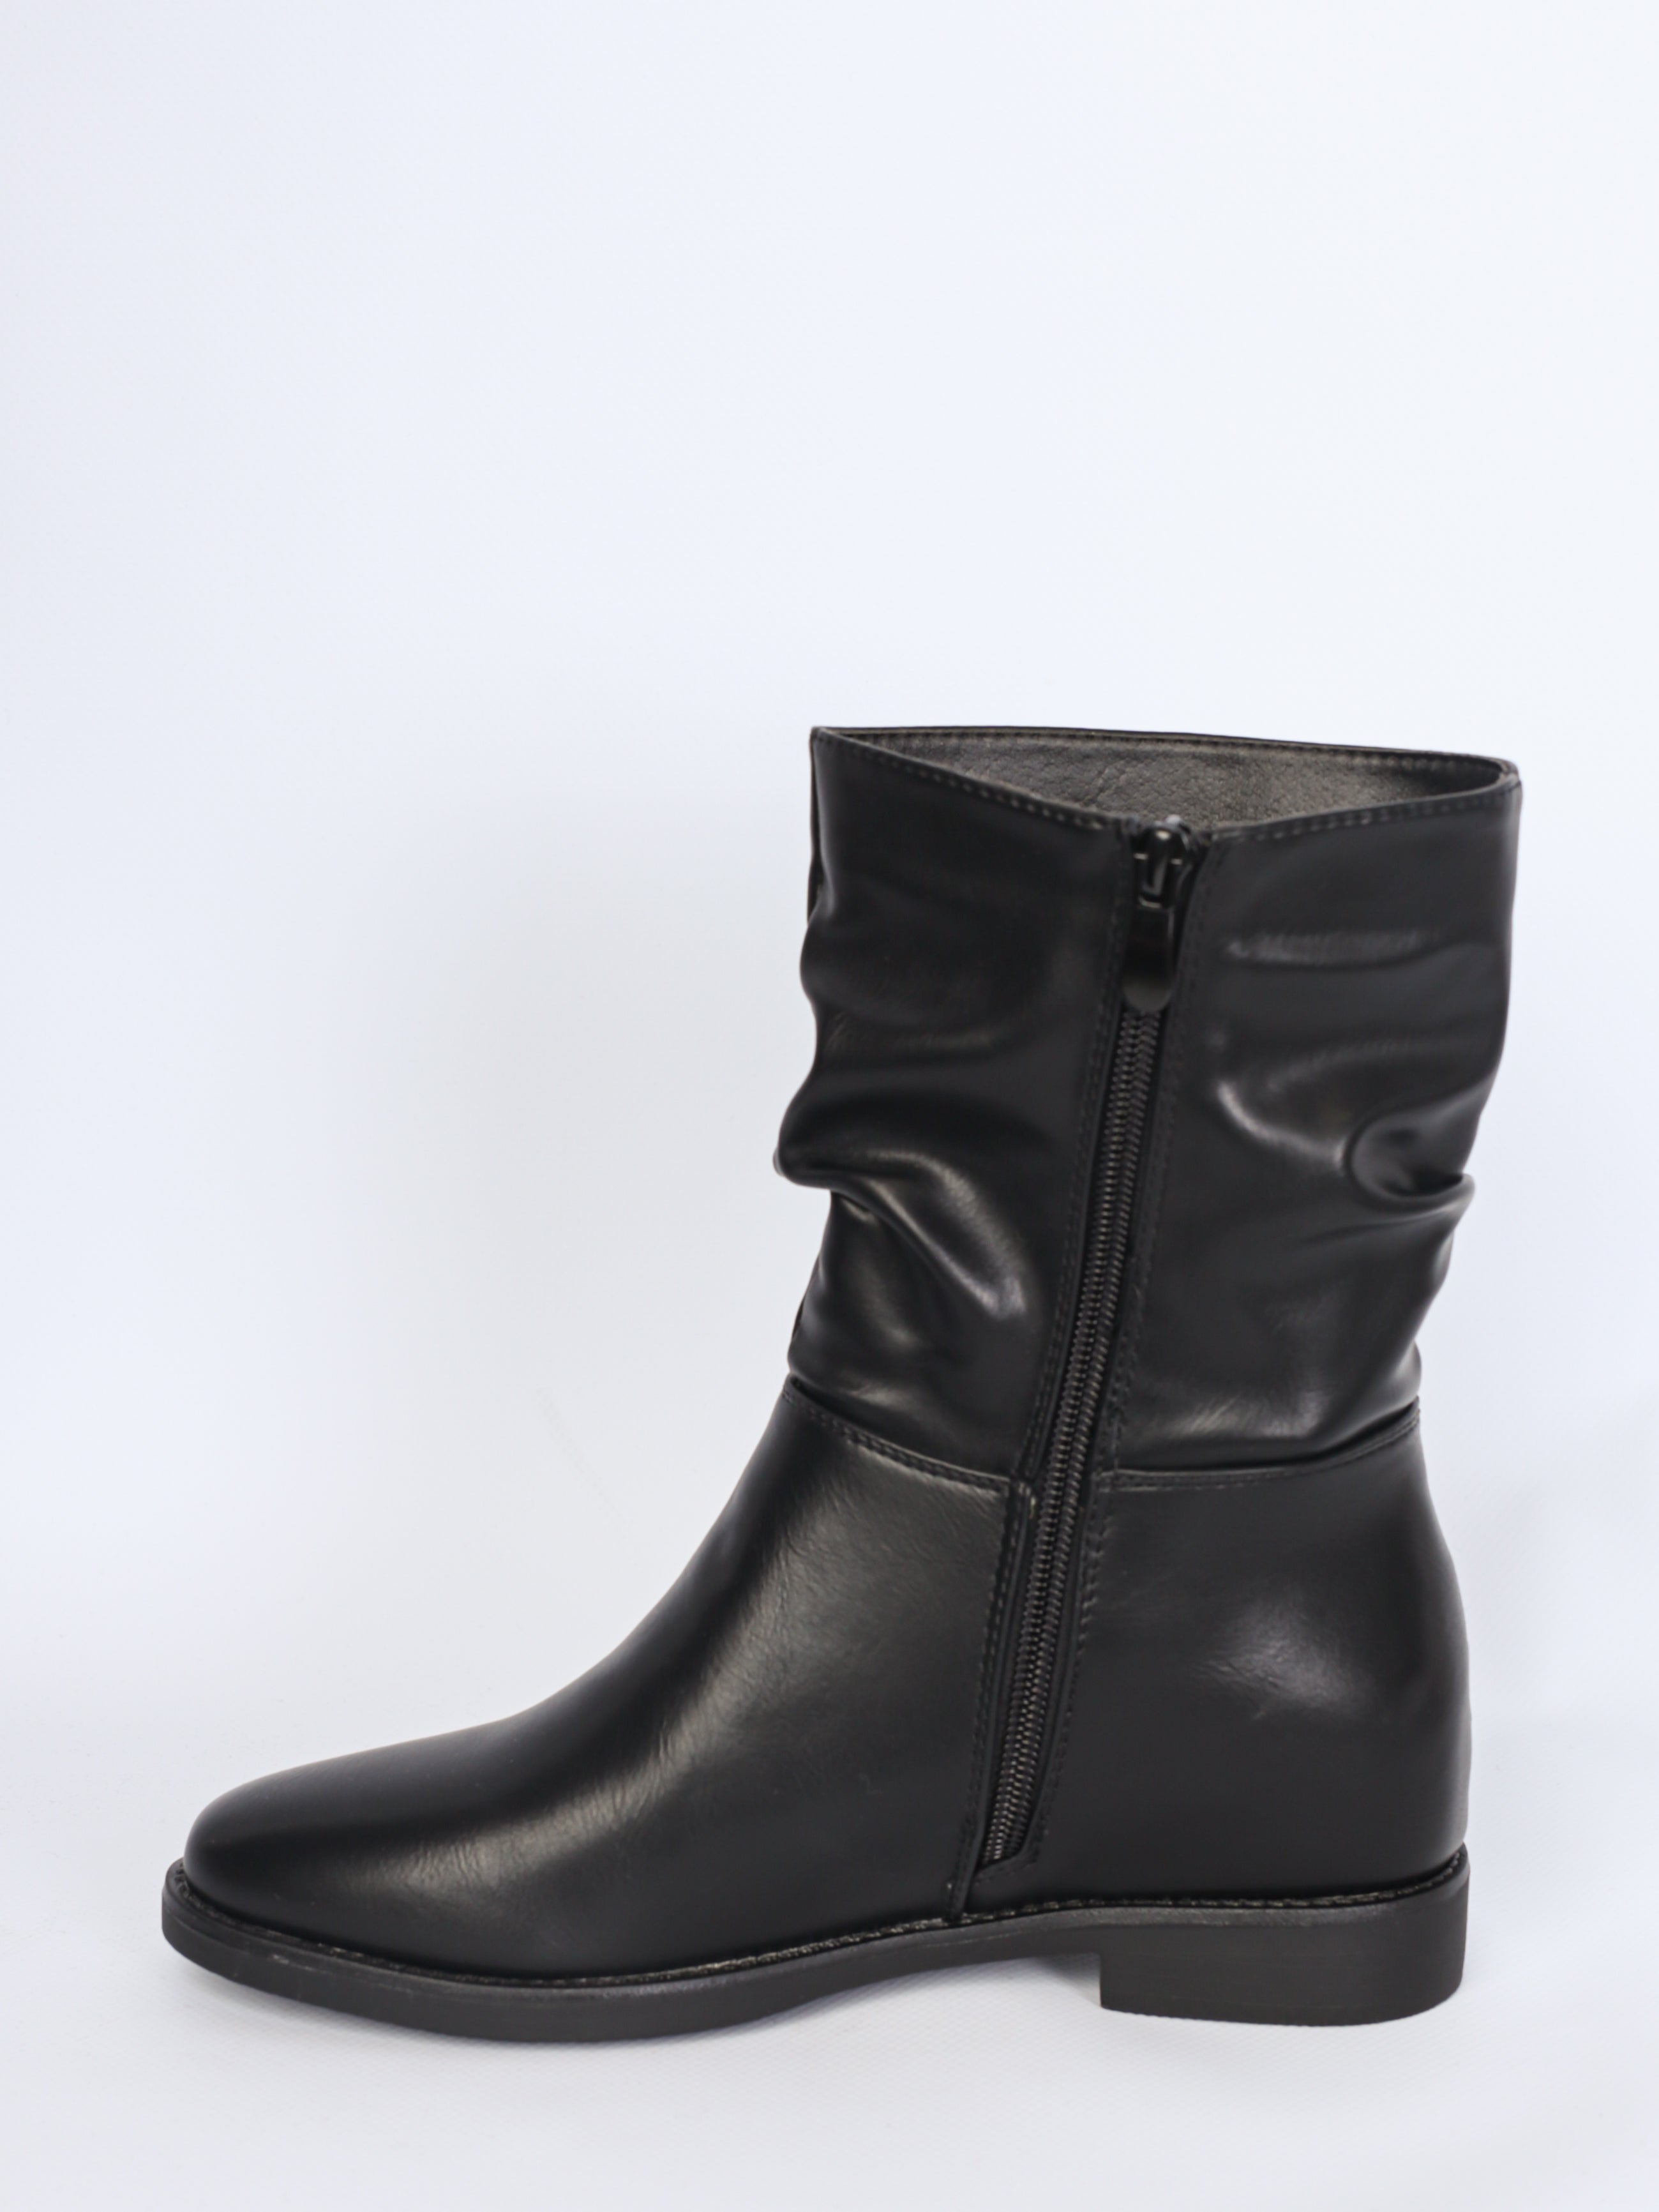 Boots with wrinkle detail